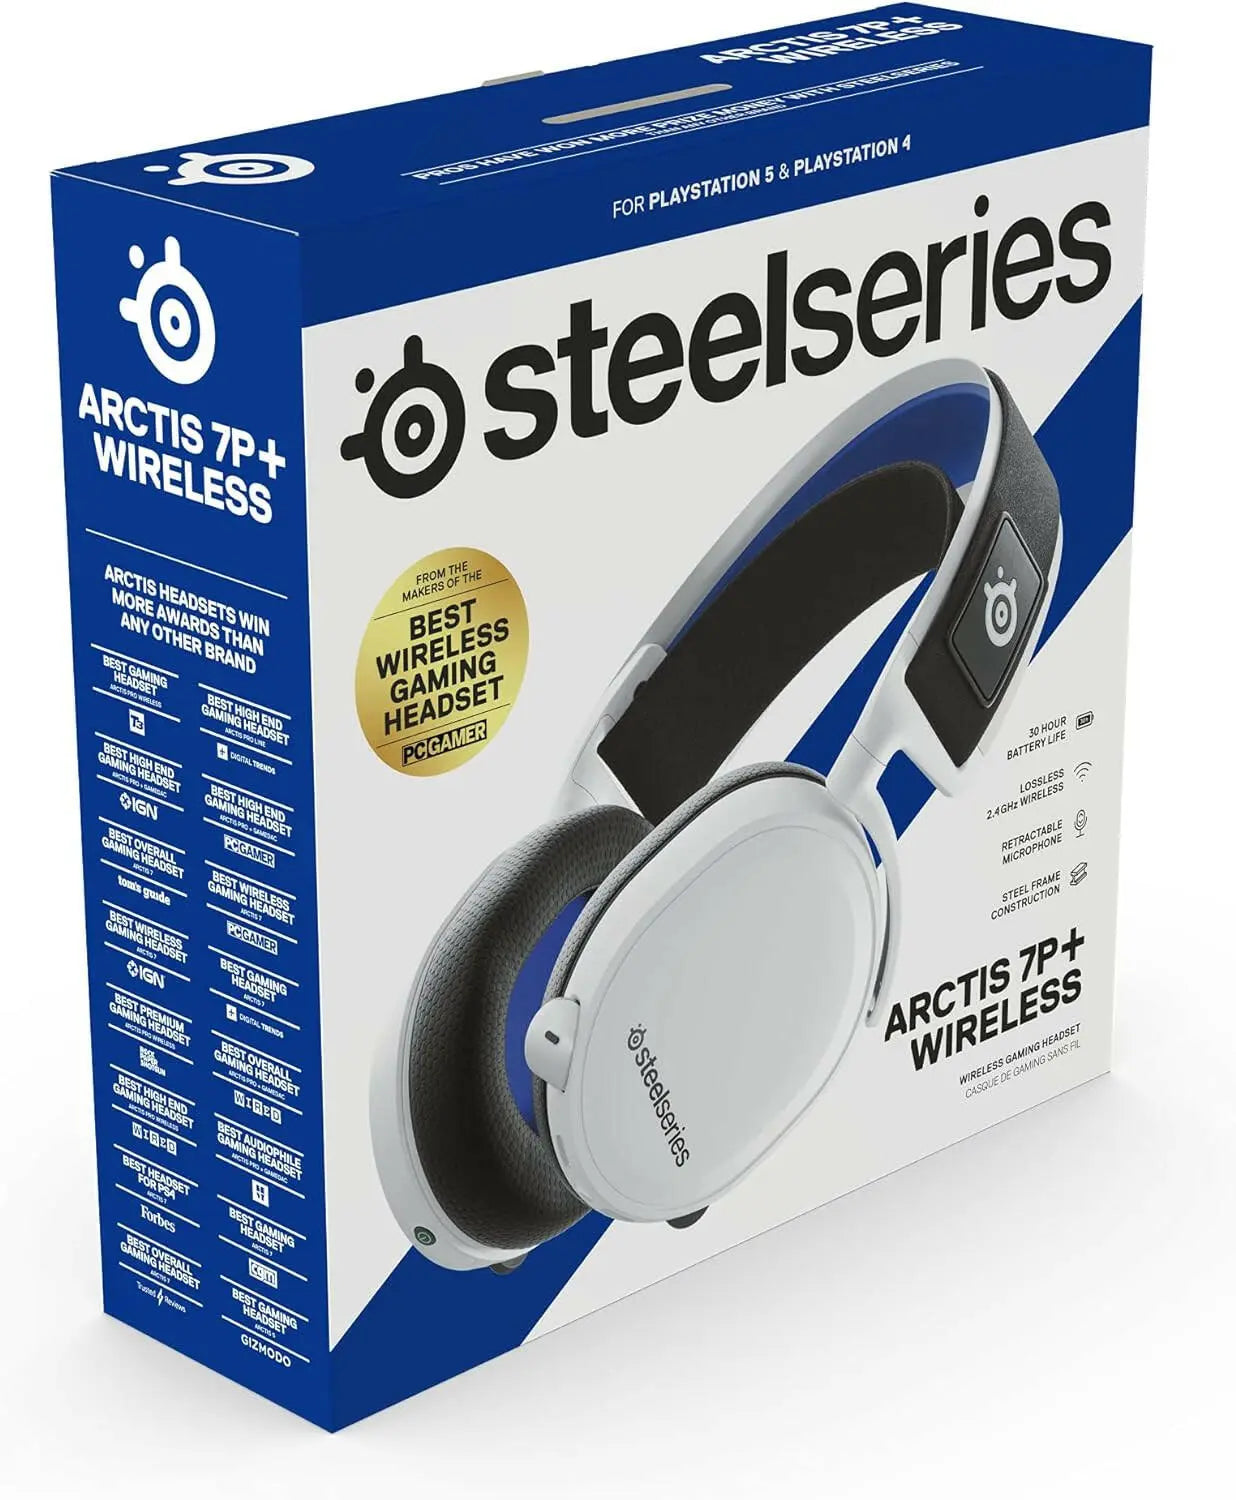 Steelseries Arctis 7P+ Wireless Gaming Headset - Lossless 2.4 Ghz - 30 Hour Battery Life - For Ps5, Ps4, Pc, Mac, Android And Switch - White